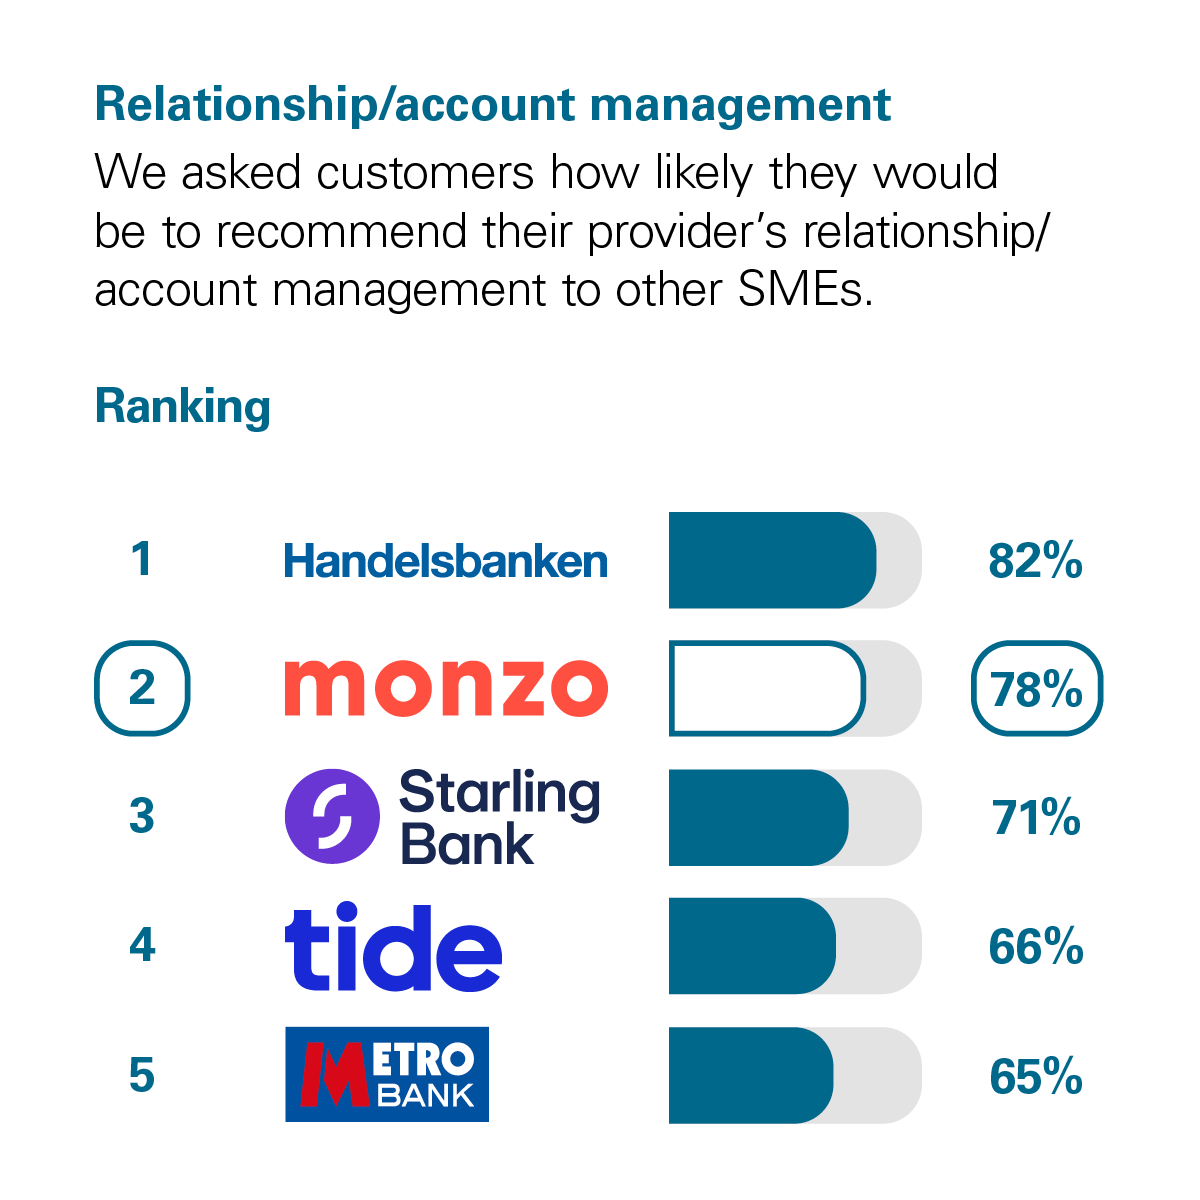 Graph showing the results of the CMA scoring of UK banks in the Relationship/Account Management category. The CMA asked customers how likely they would be to recommend their provider's account management services to other small and medium-sized enterprises (SMEs*). The rankings with percentage scores are: 1st Handelsbanken with 82%. 2nd Monzo with 78%. 3rd Starling Bank with 71%. 4th Tide with 66%. 5th Metro Bank with 65%.